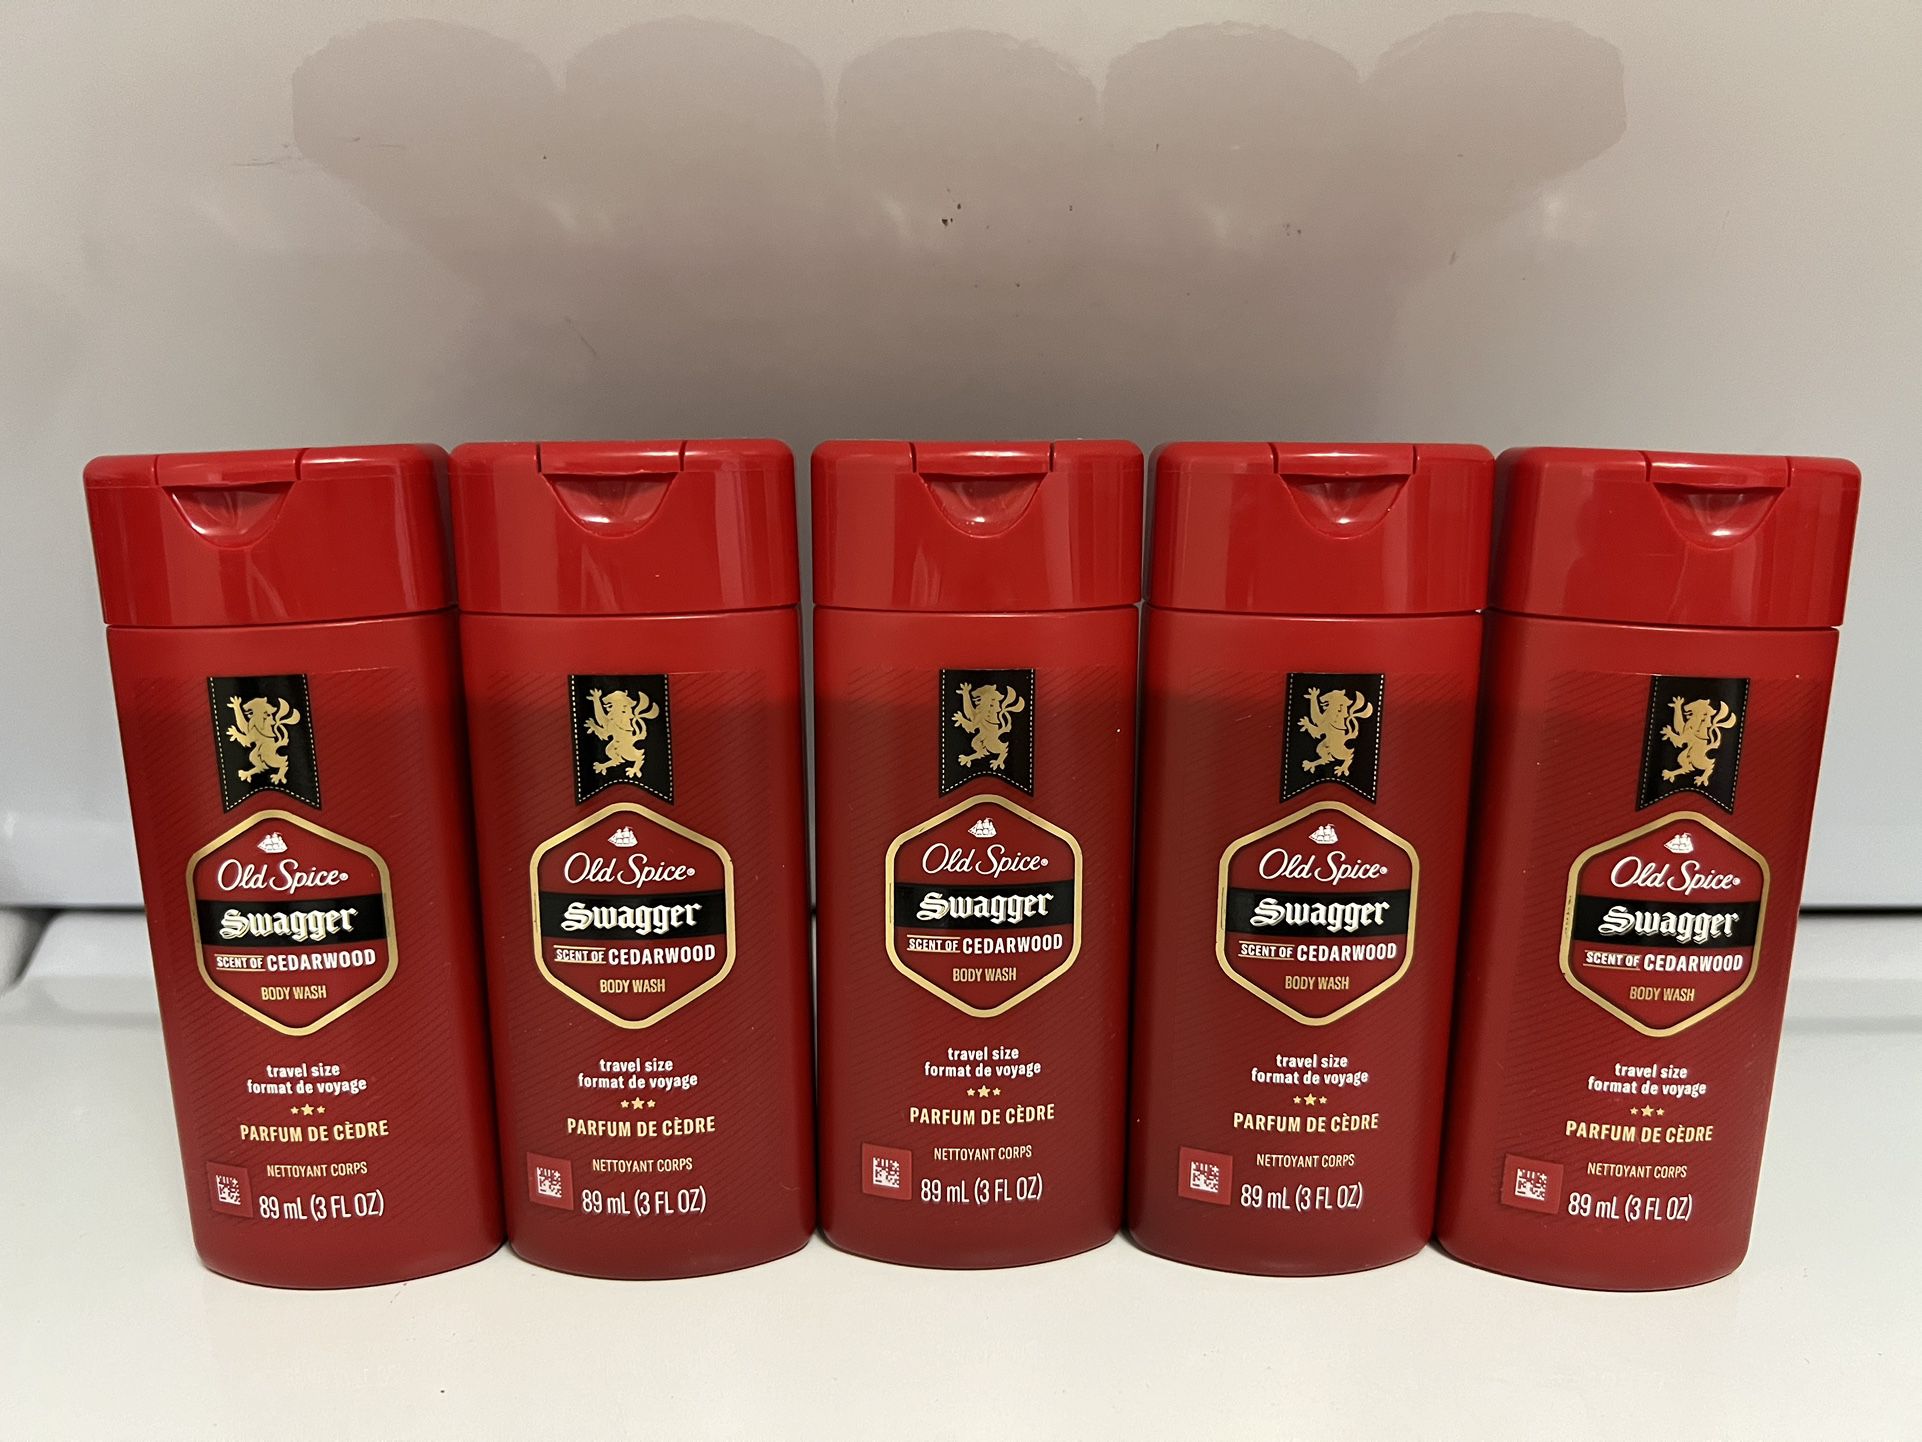 Old Spice 3 oz travel size body wash all for $5